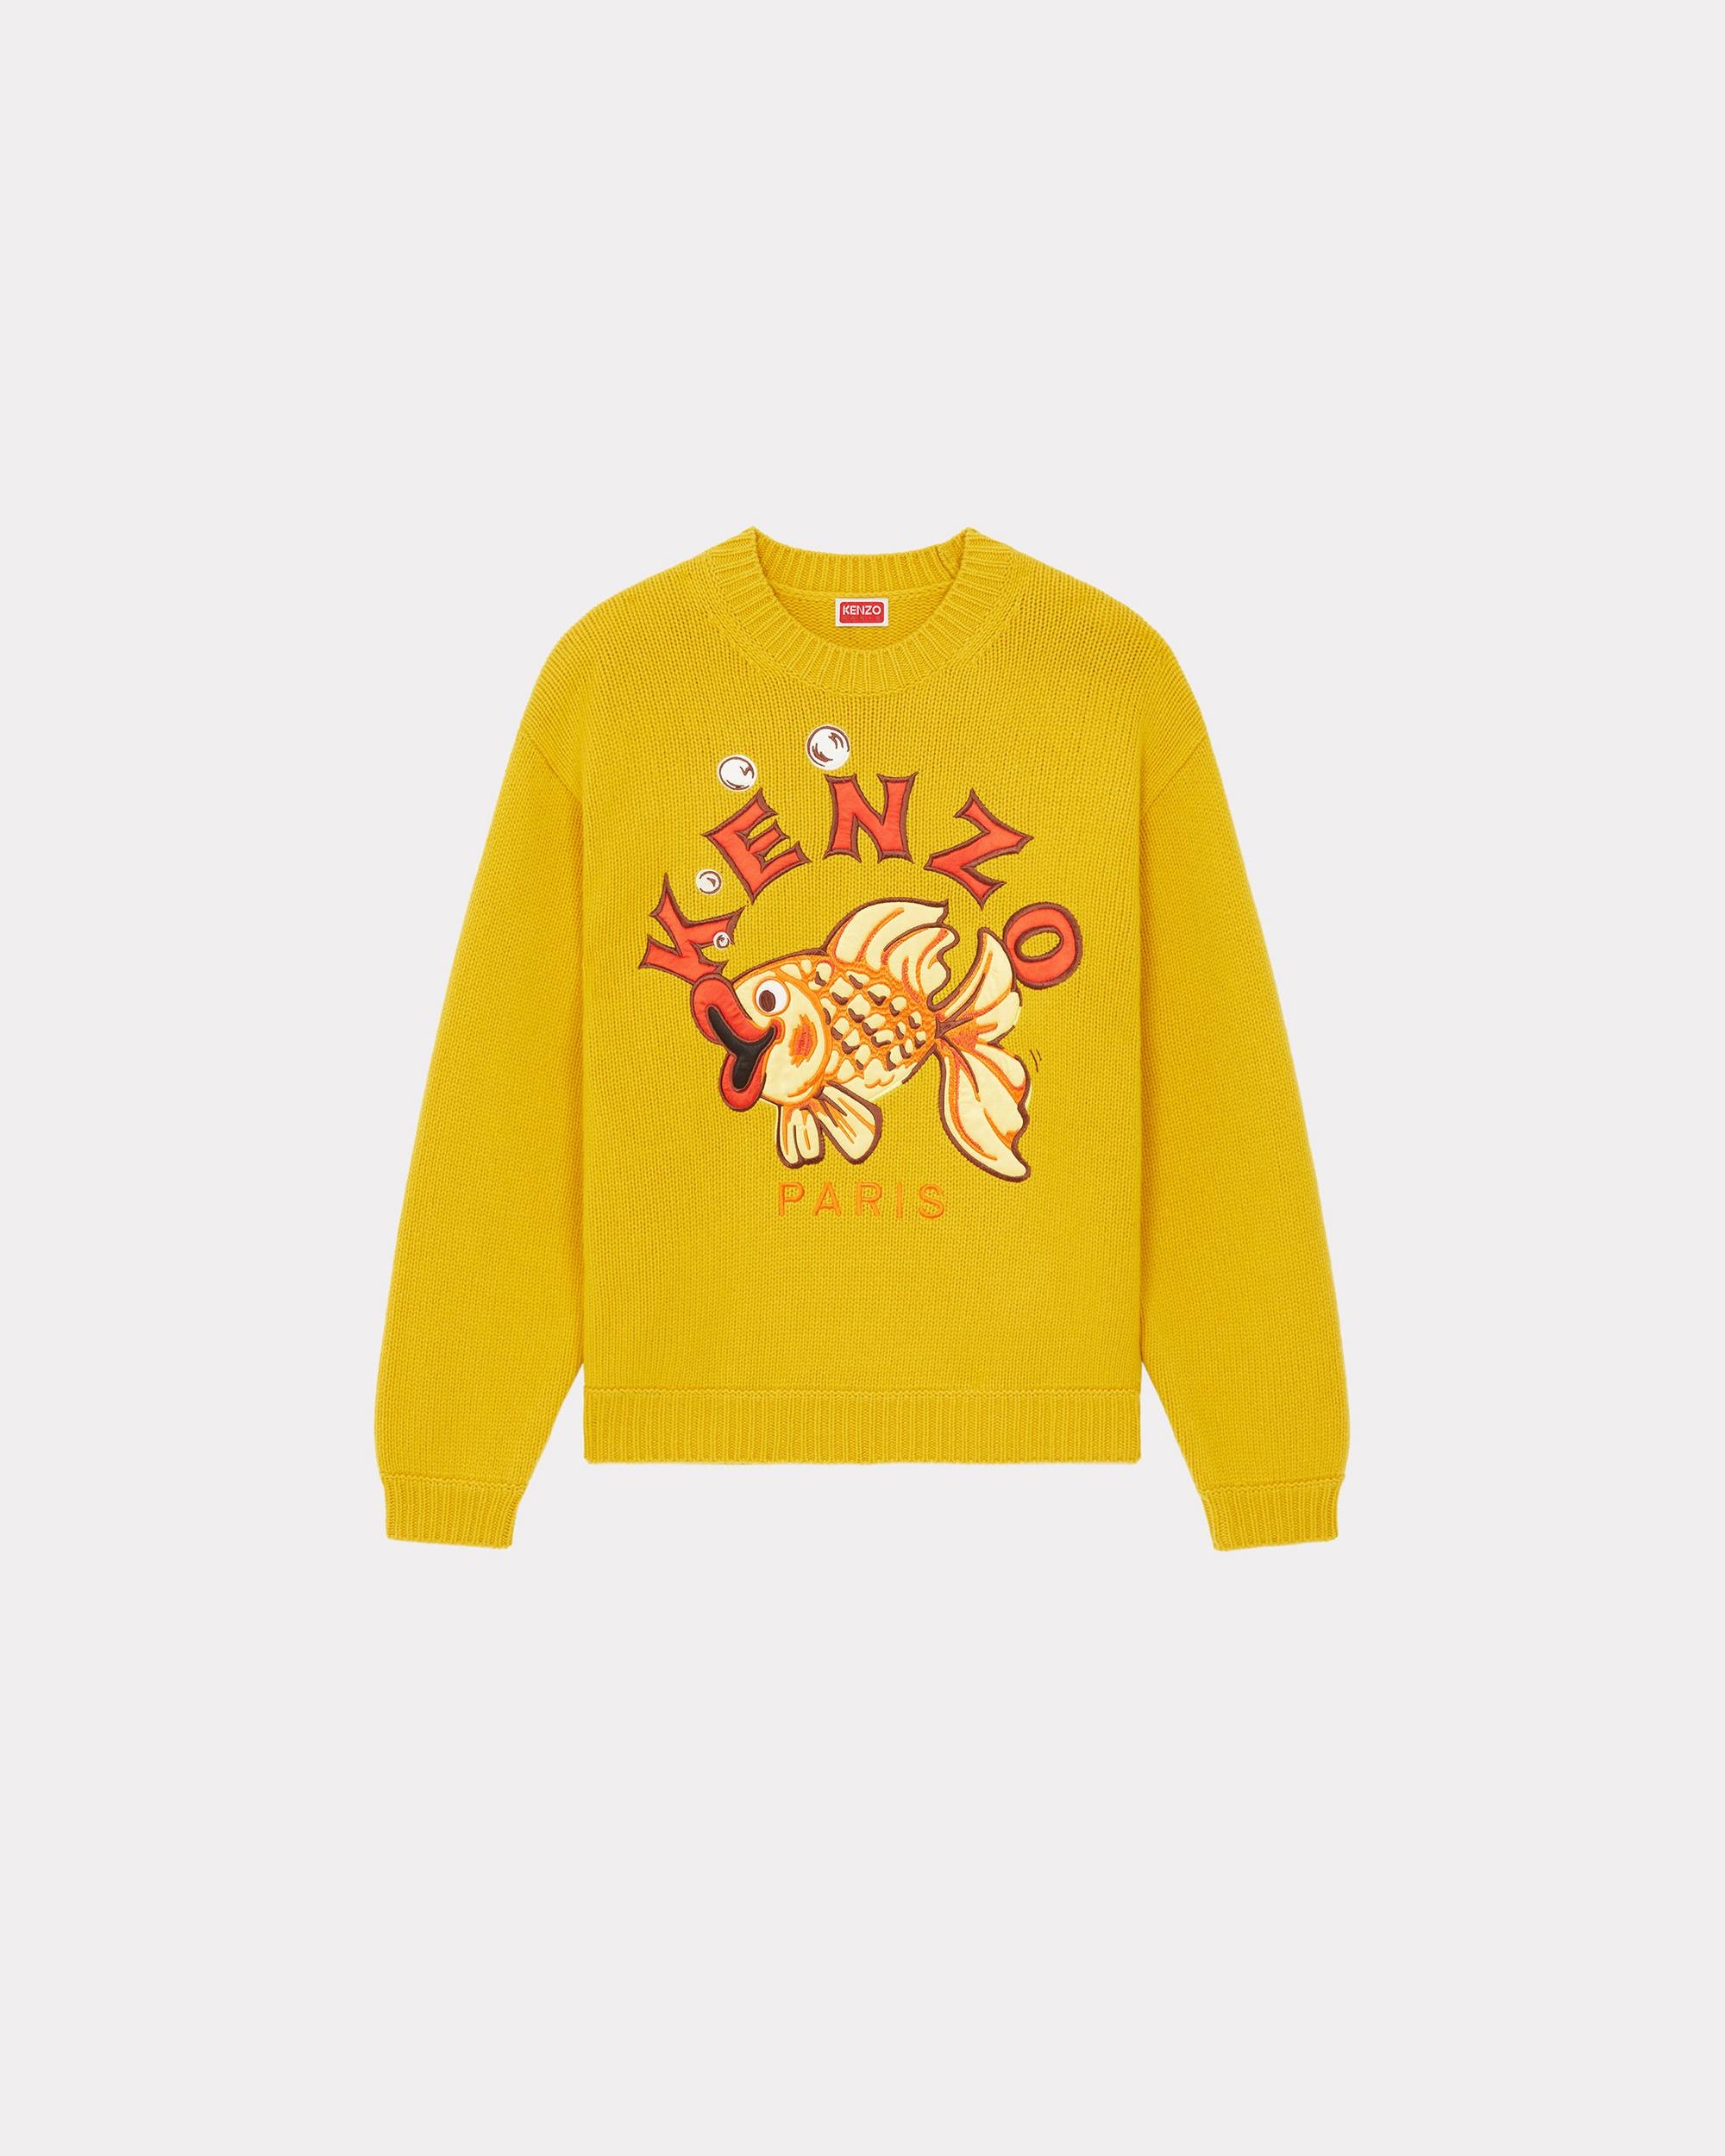 KENZO 'KENZO Kingyo Placed' embroidered jumper | REVERSIBLE